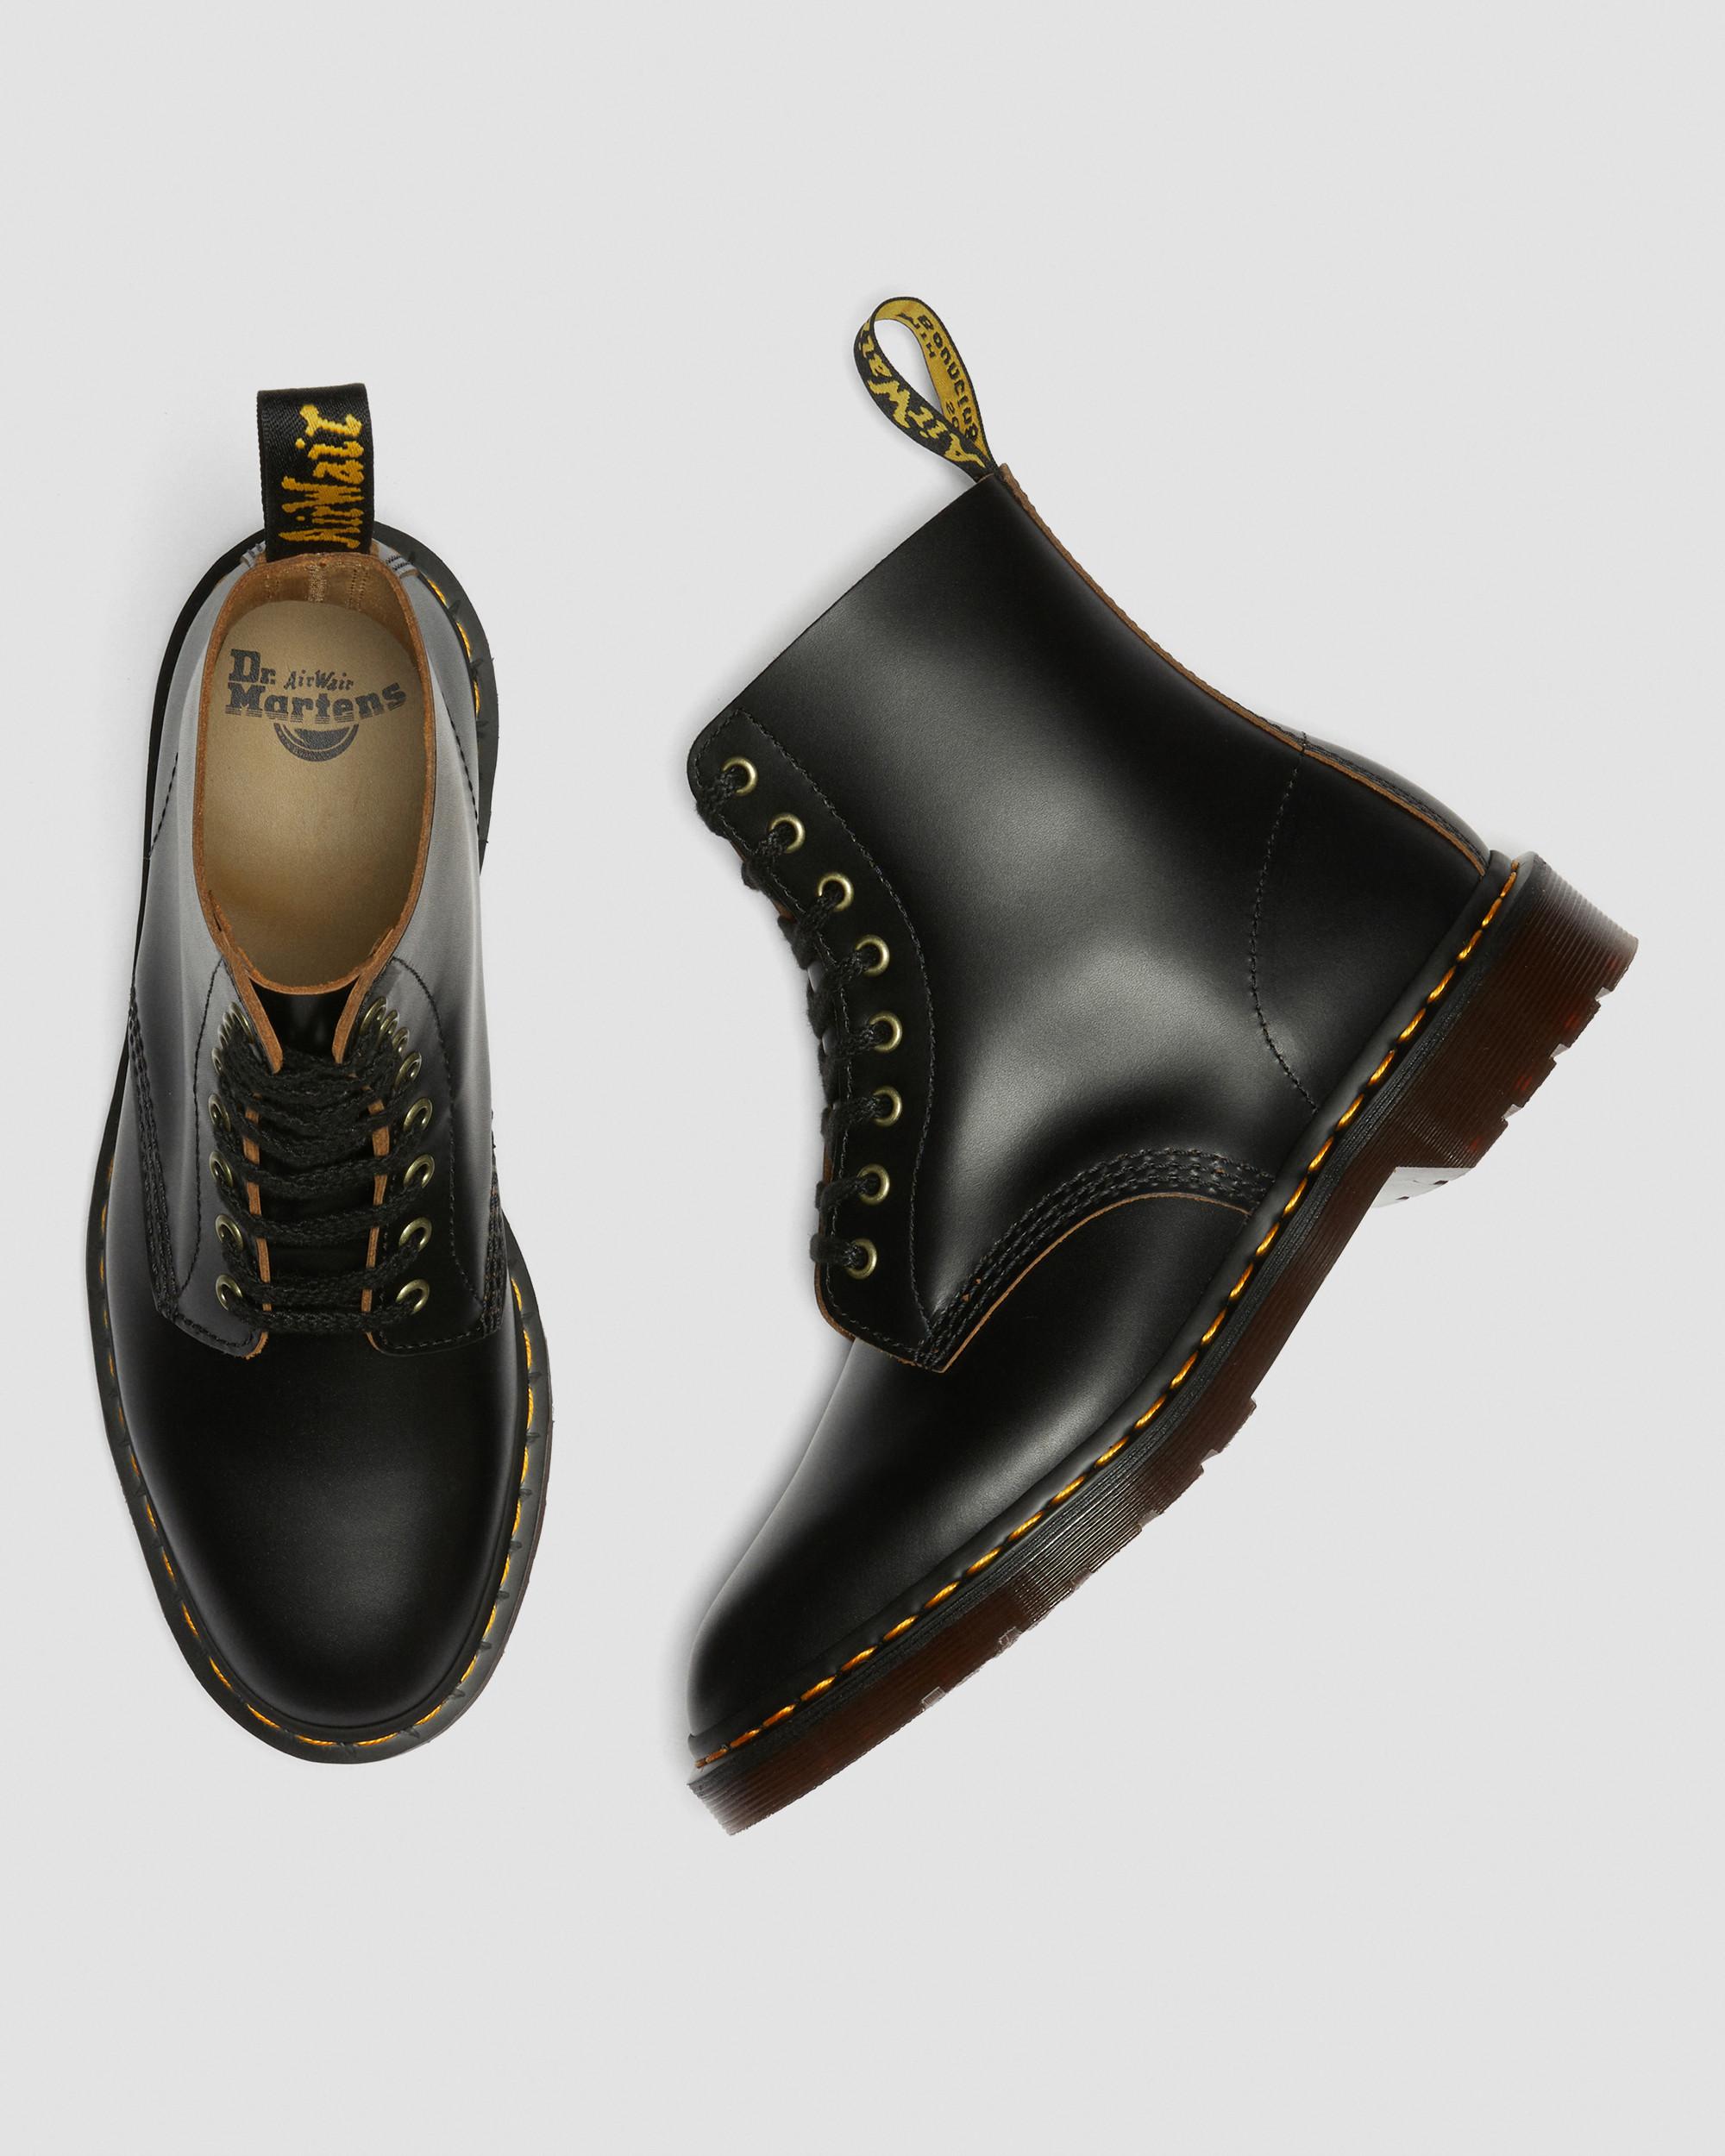 Chaussures Smiths en cuir Vintage SmoothBoots Smiths en cuir Vintage Smooth Dr. Martens